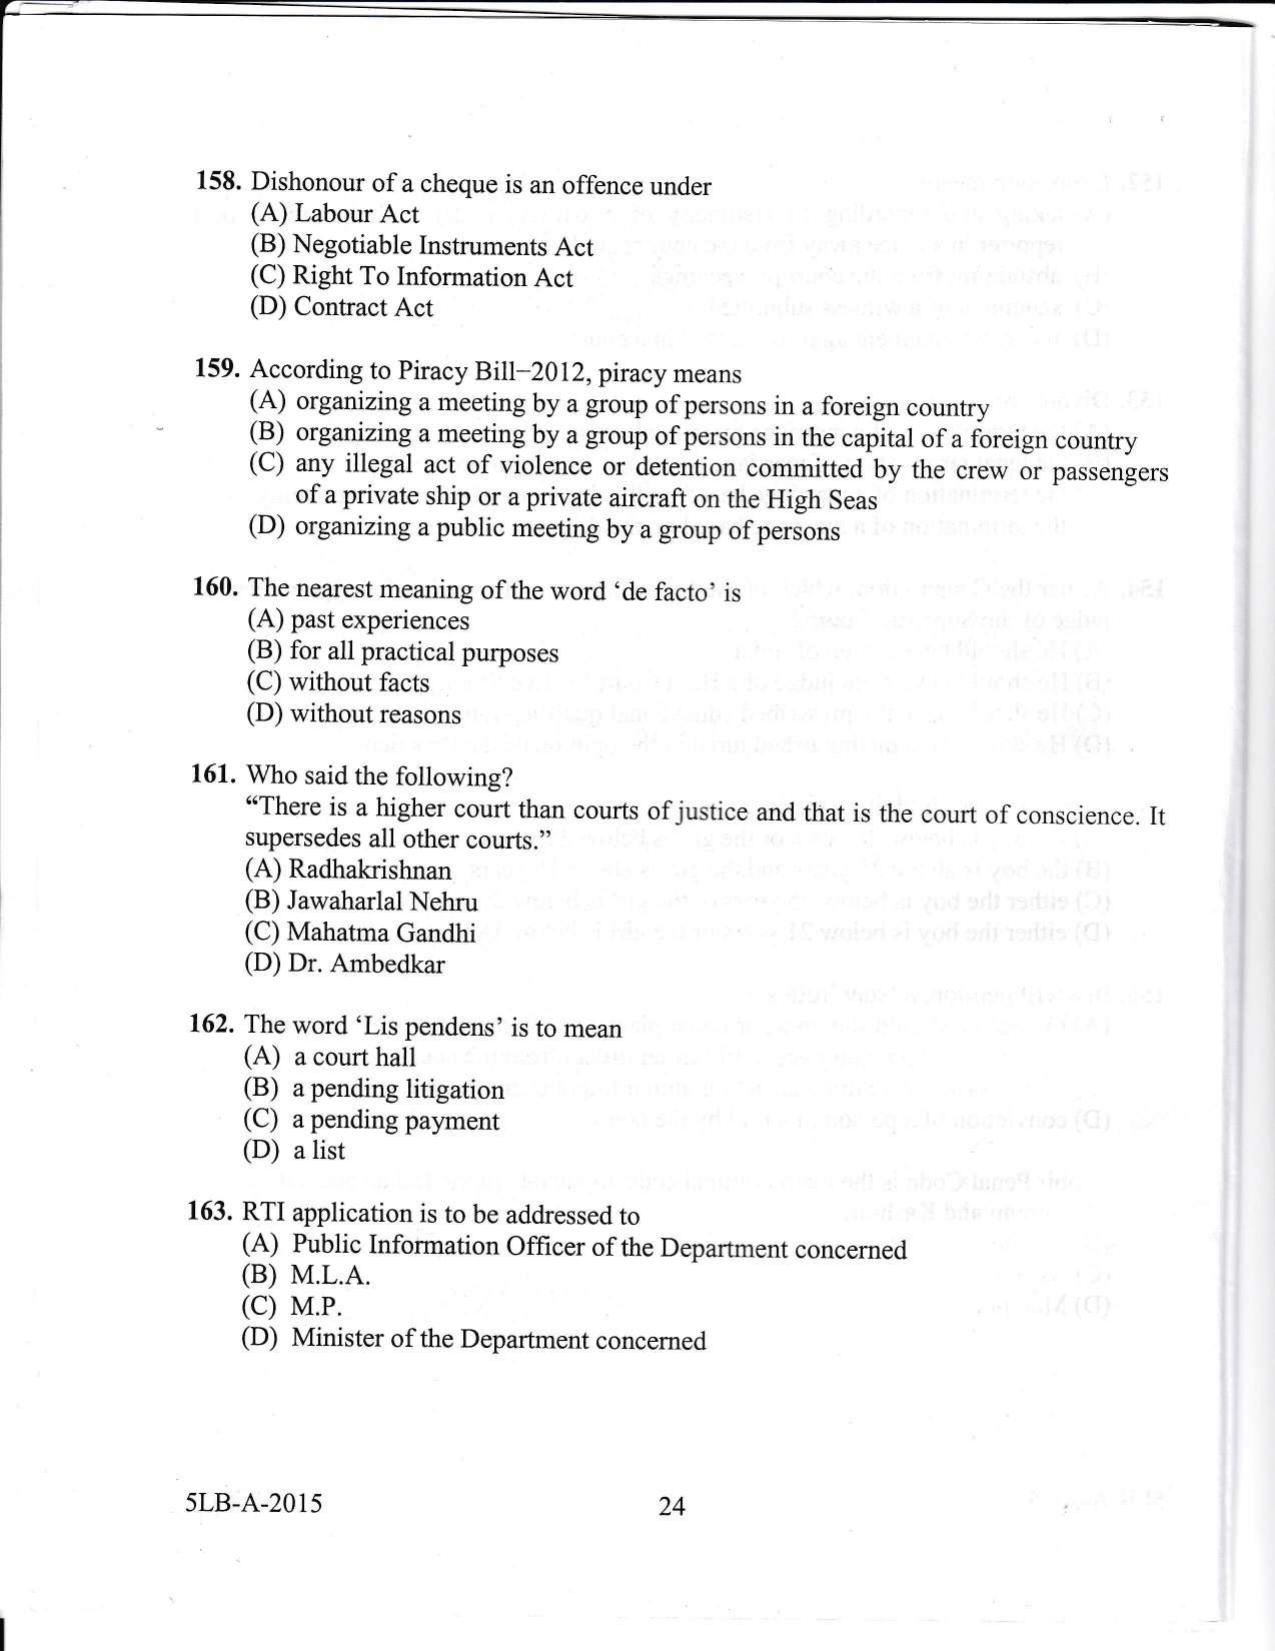 KLEE 5 Year LLB Exam 2015 Question Paper - Page 24